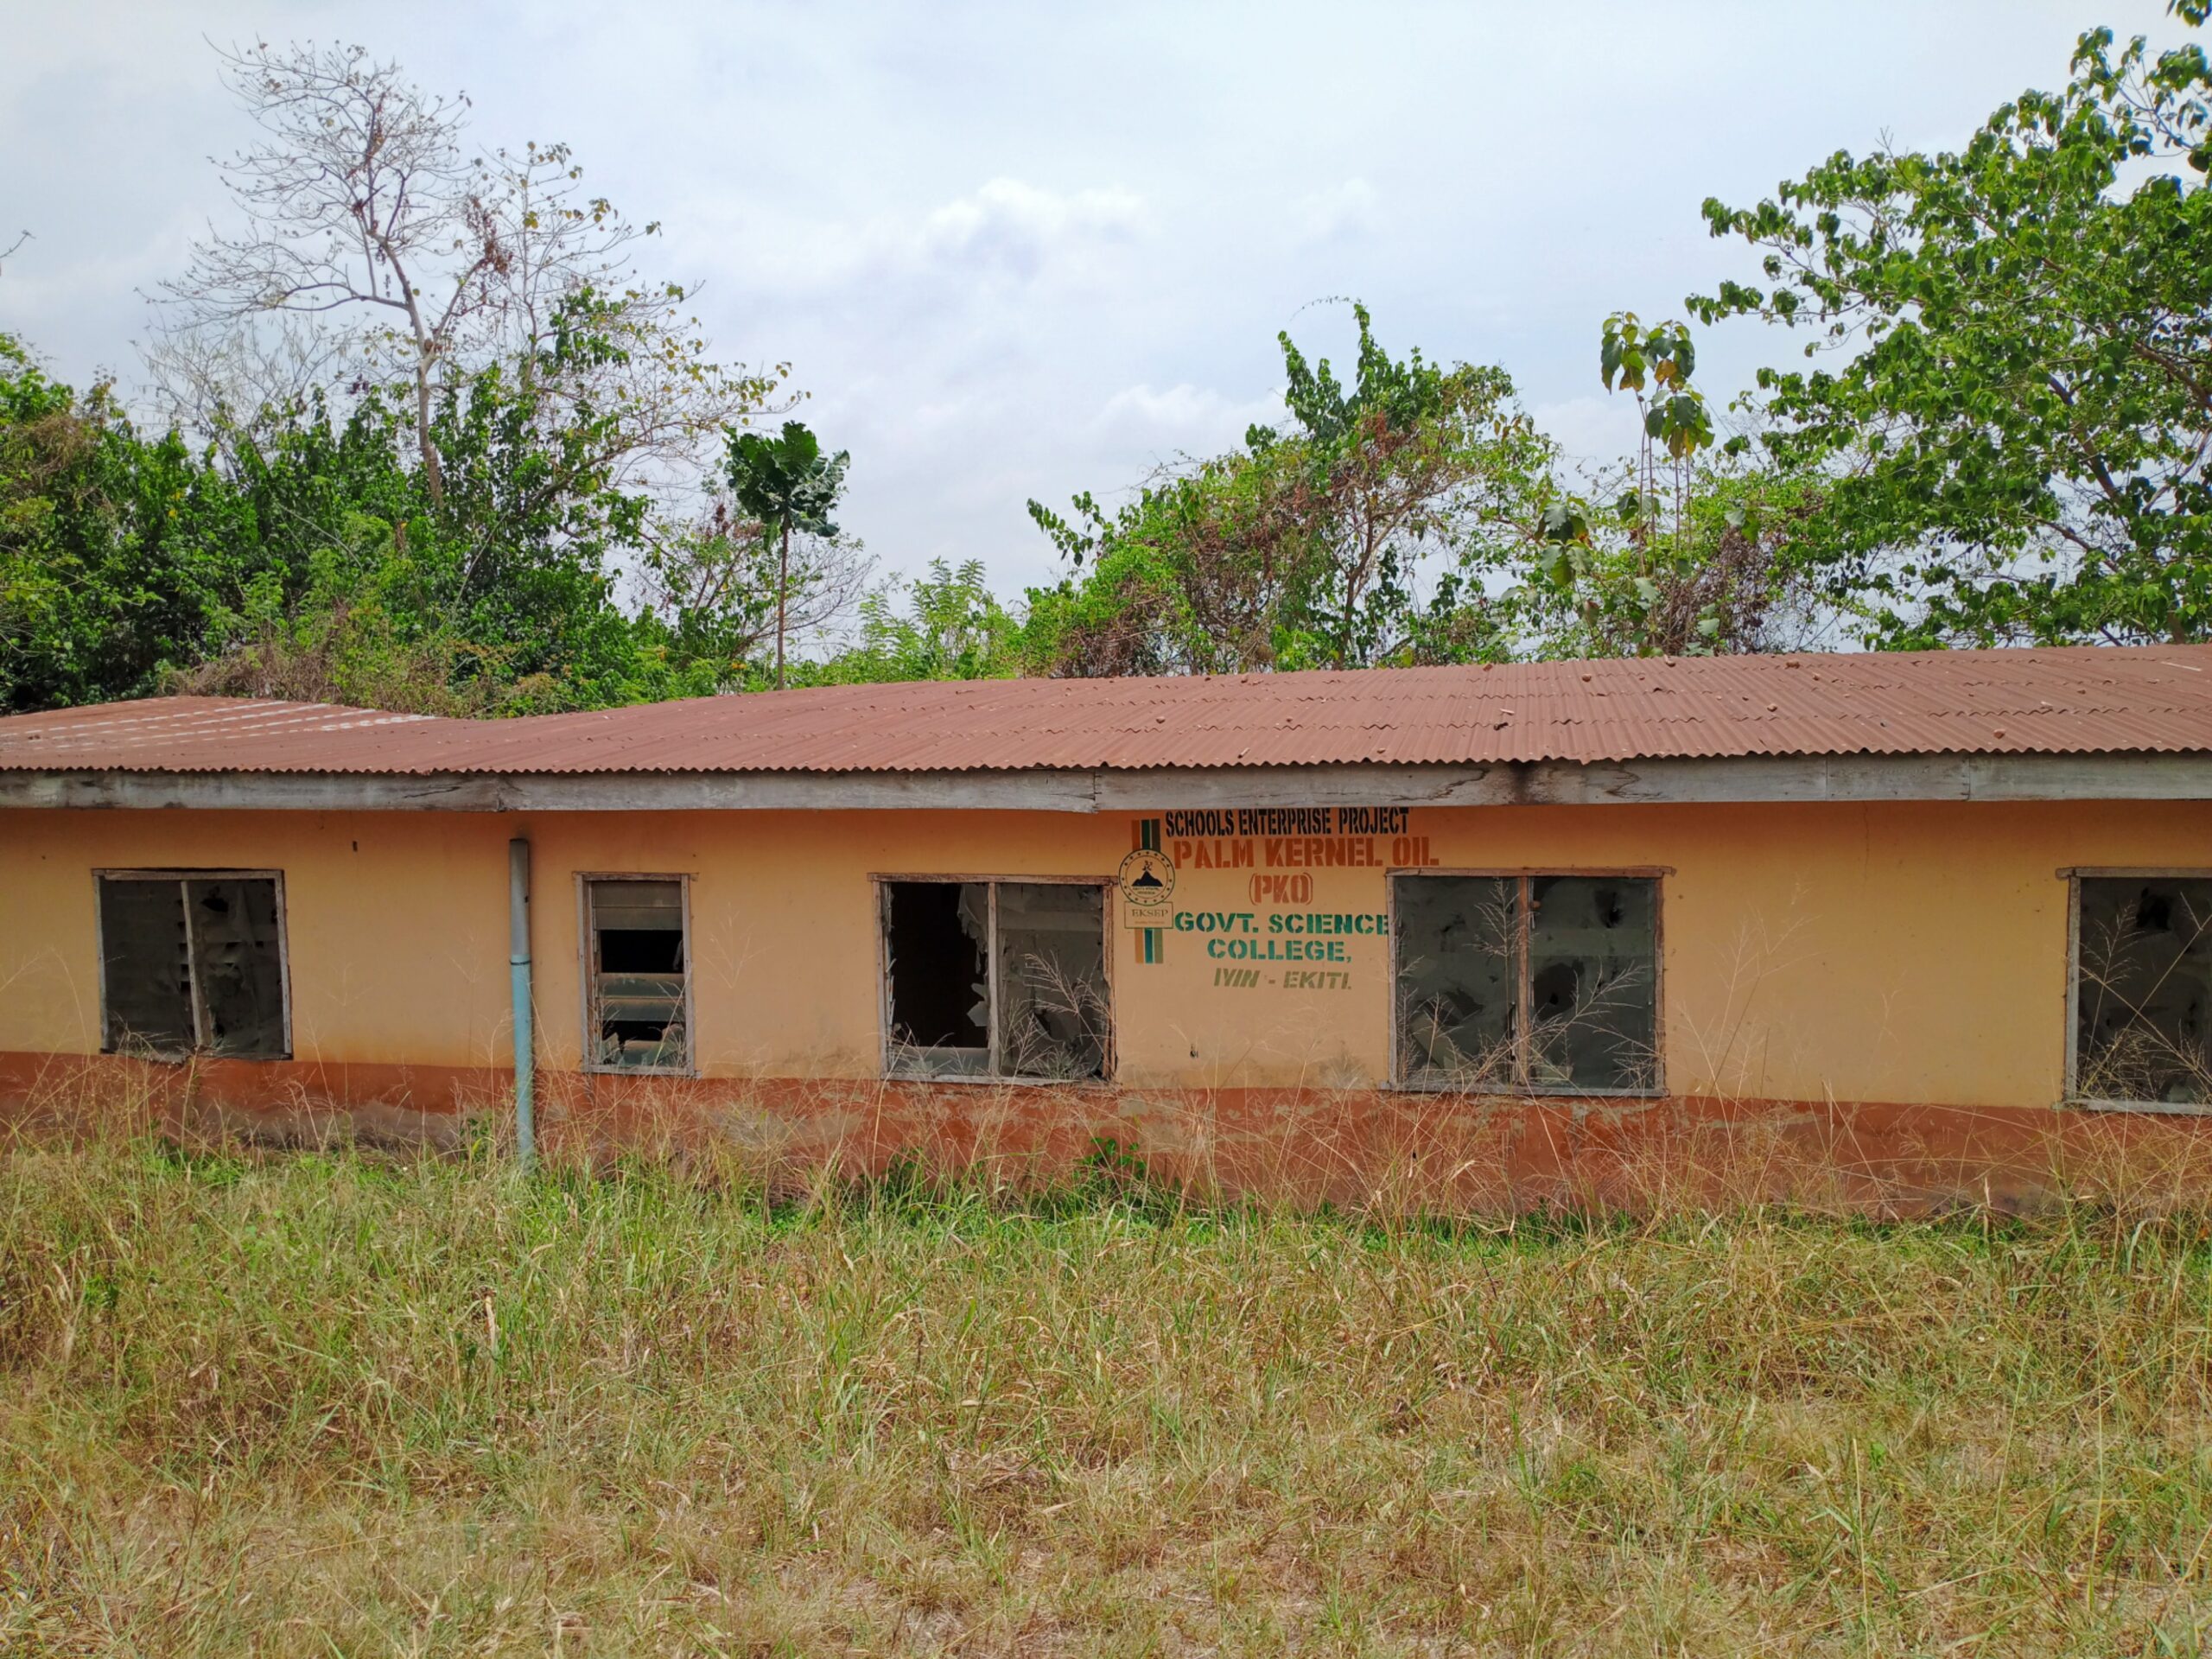 The neglected Palm Kernel oil industry in Government Science College, Iyin Ekiti.